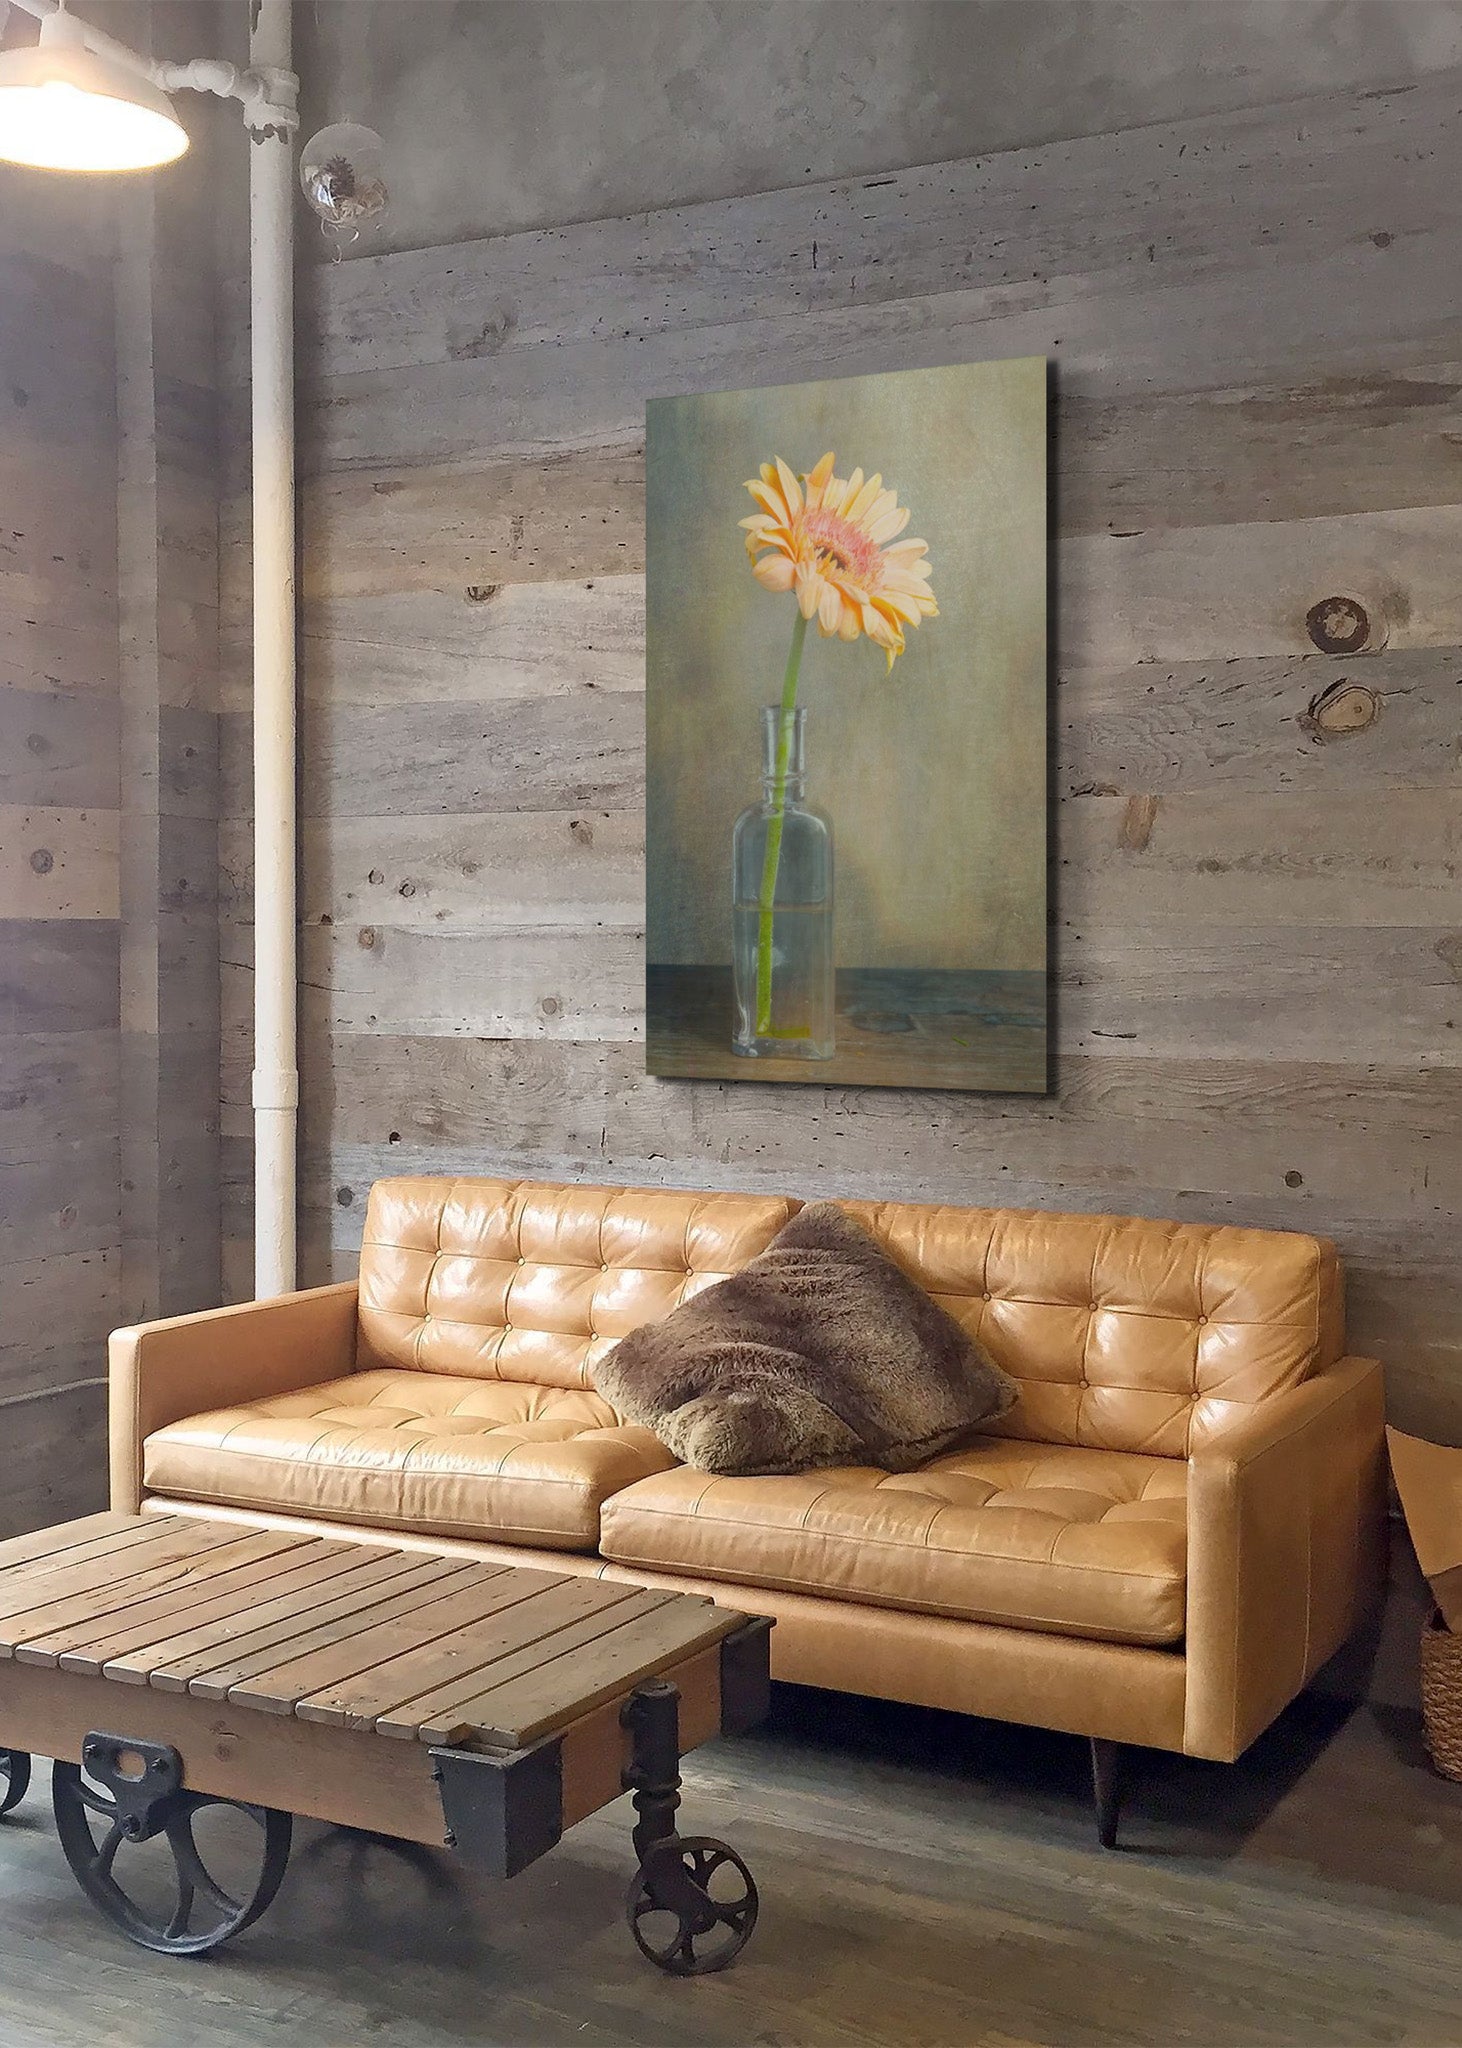 Picture hanging on the wall over a sofa. The picture is a fine art flower photograph of a Gerber daisy in an old bottle titled "Summer Day" by Cameron Dreaux of Dreaux Fine Art.